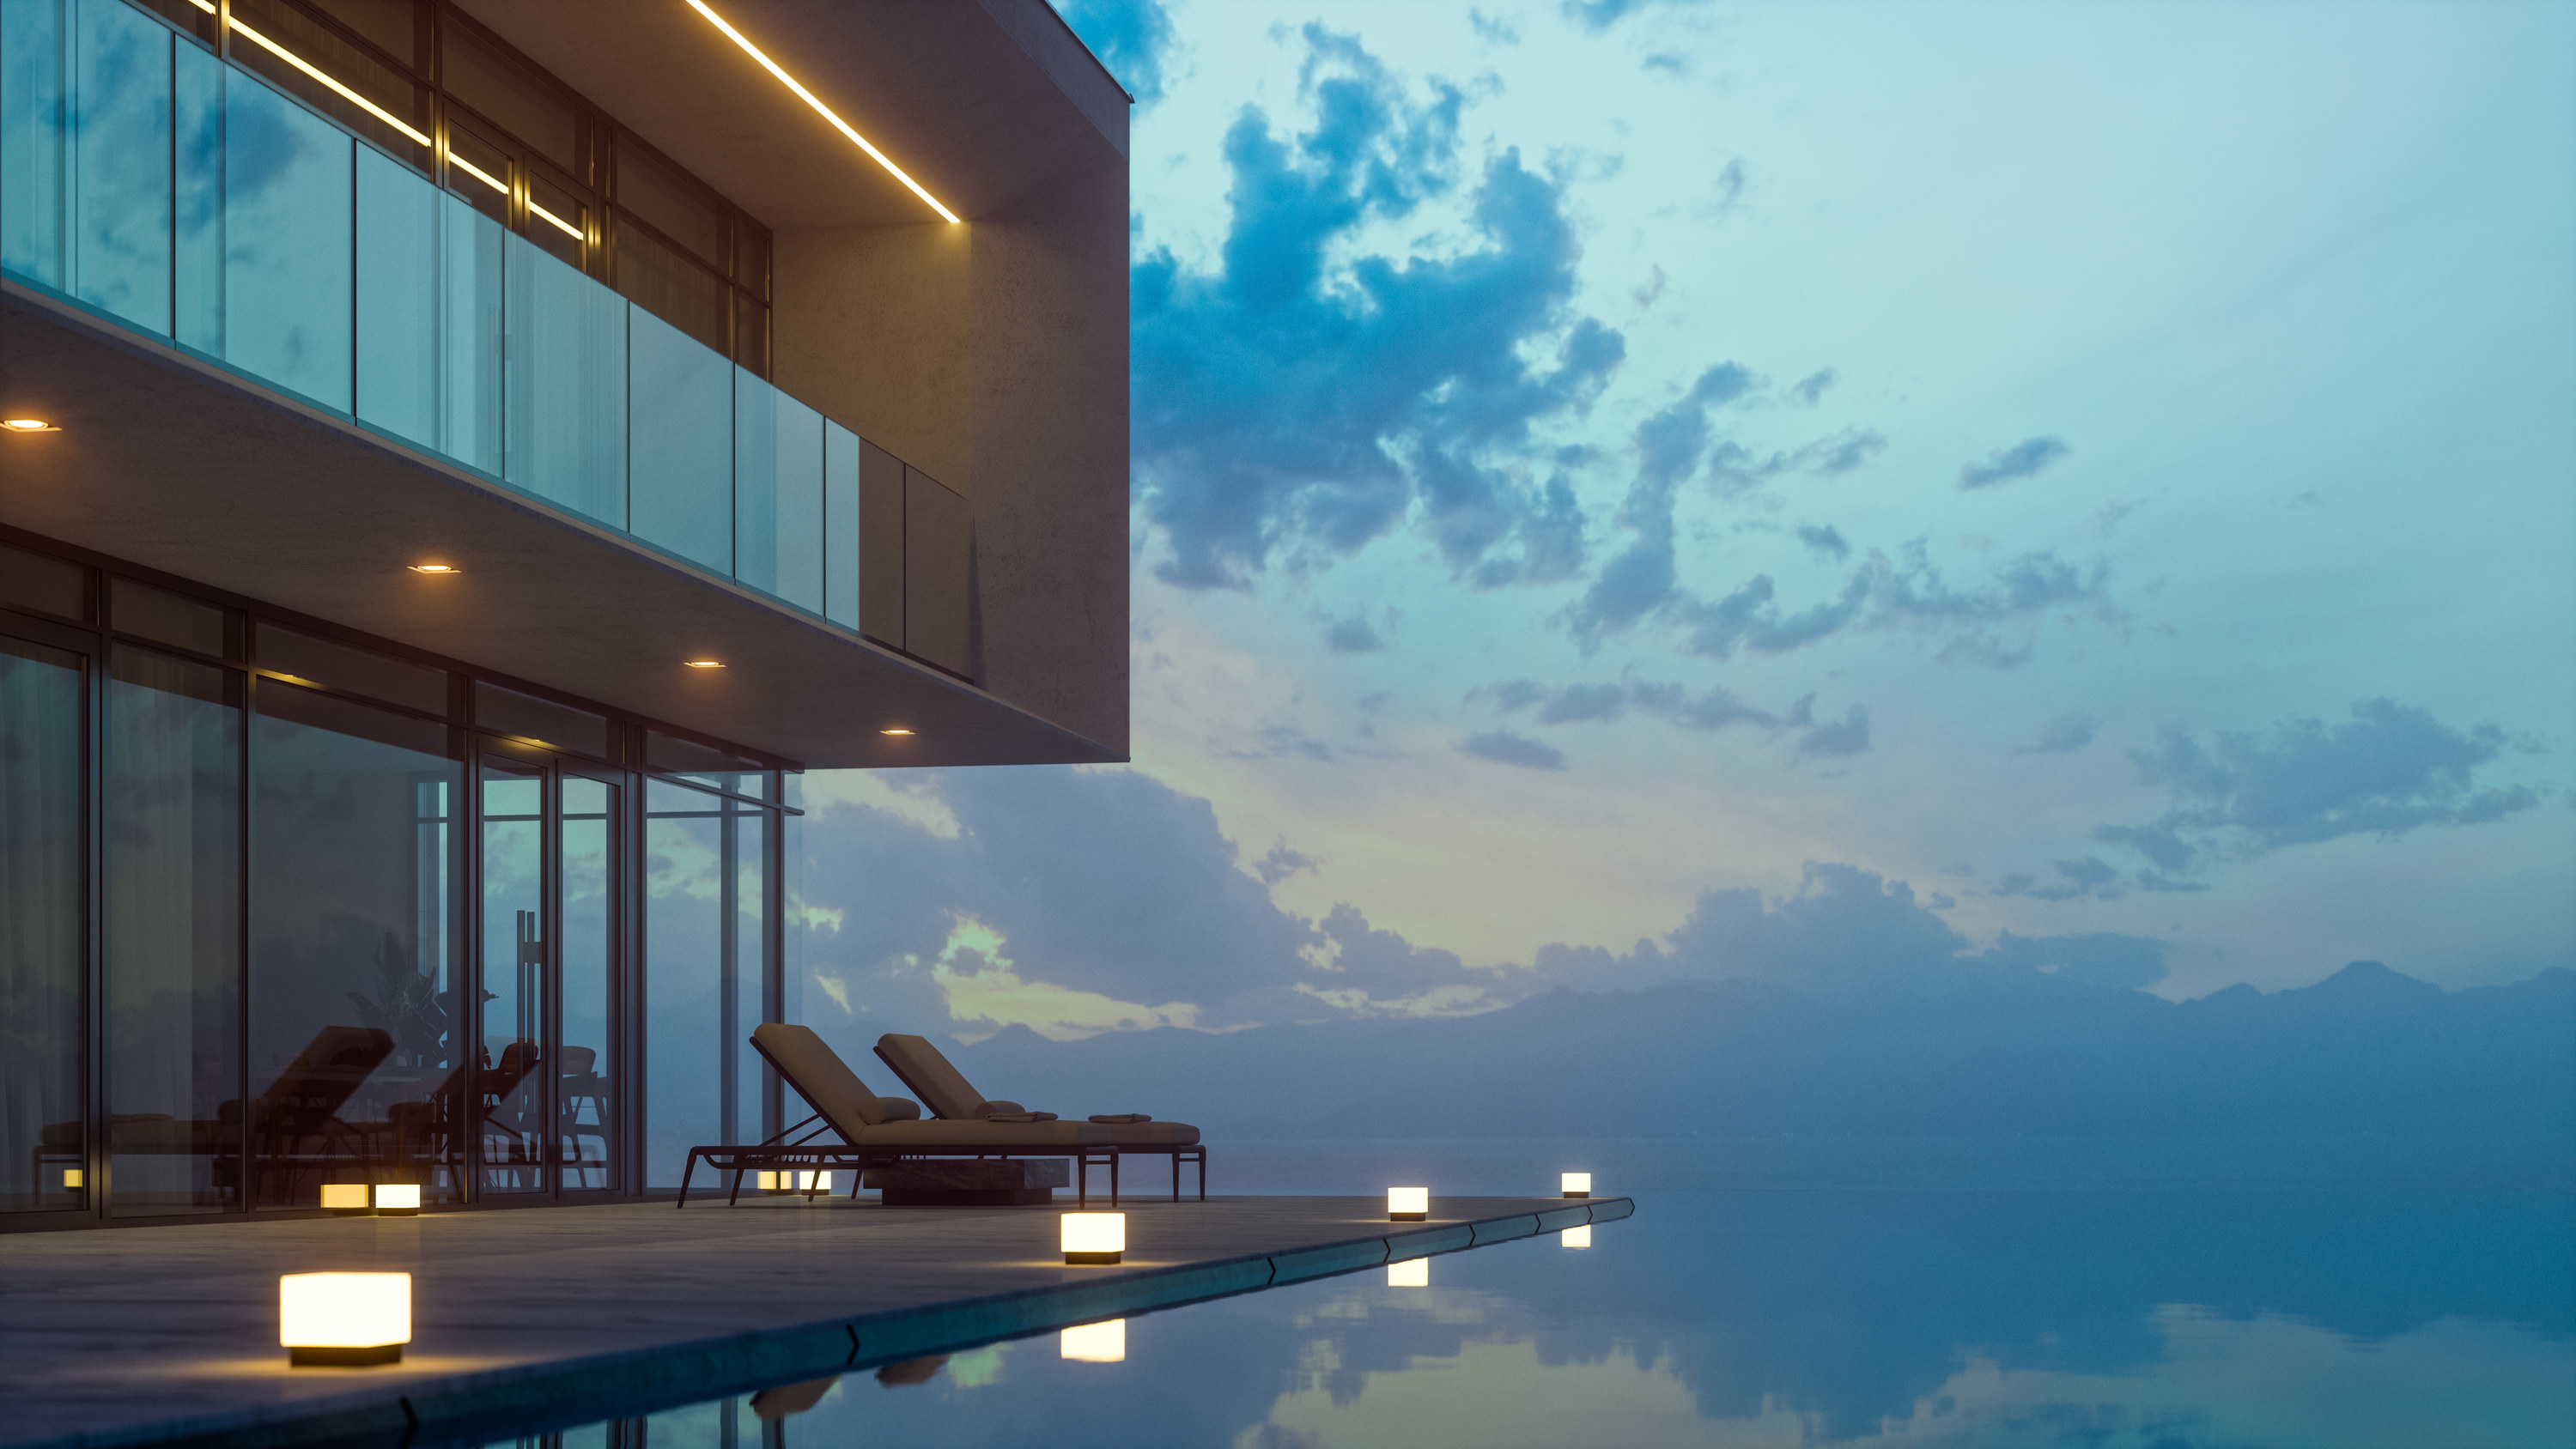 Luxurious villa with private infinity pool and chaise lounges at summer in dusk.